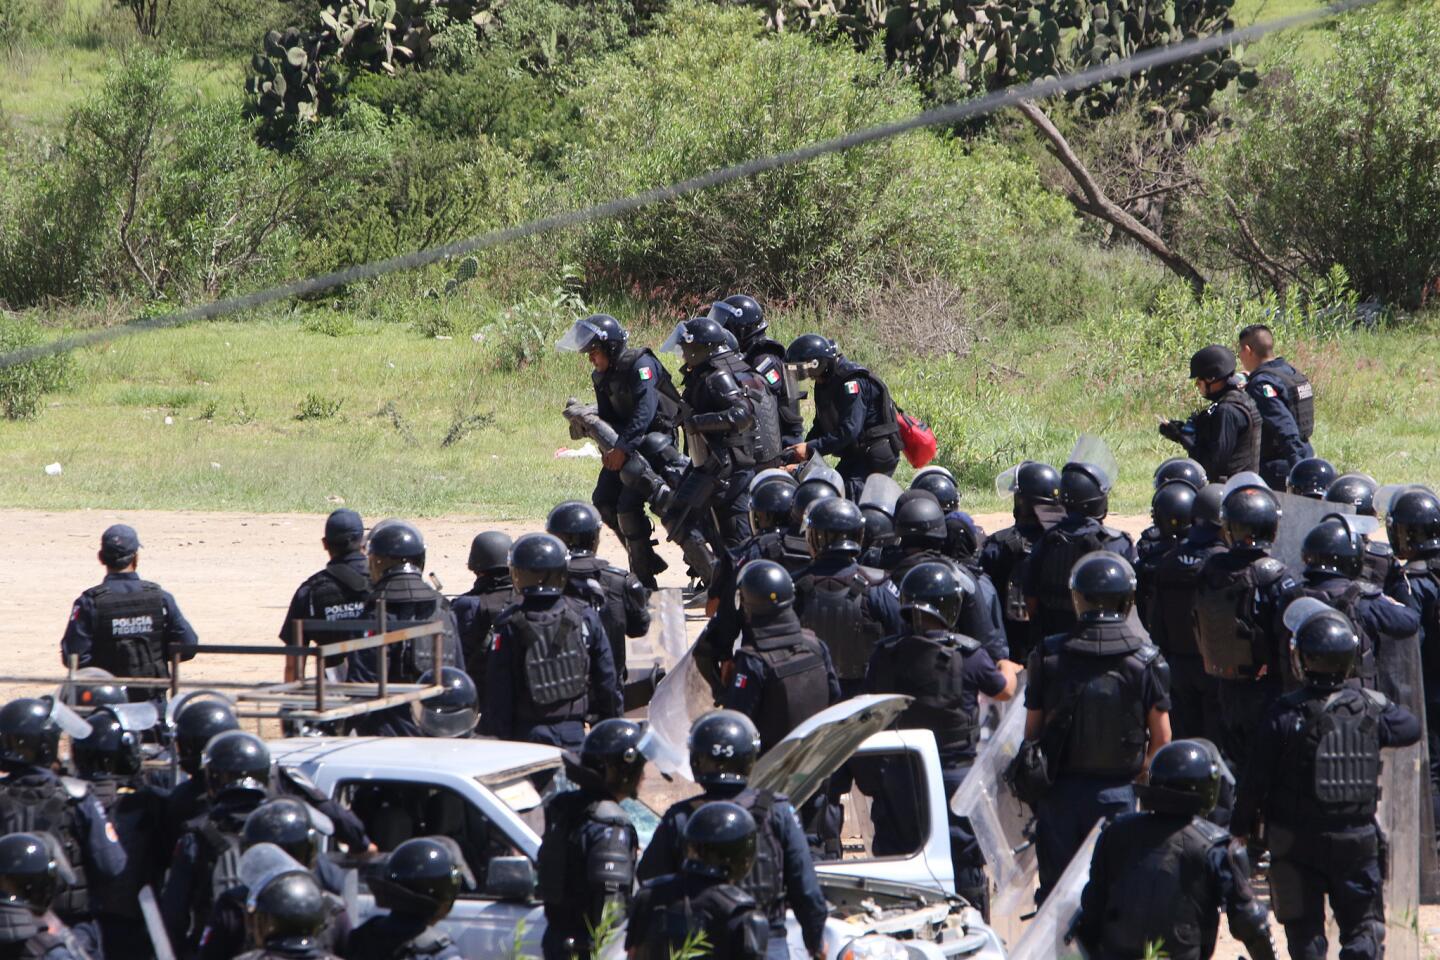 Teacher protest in southern Mexico turns violent